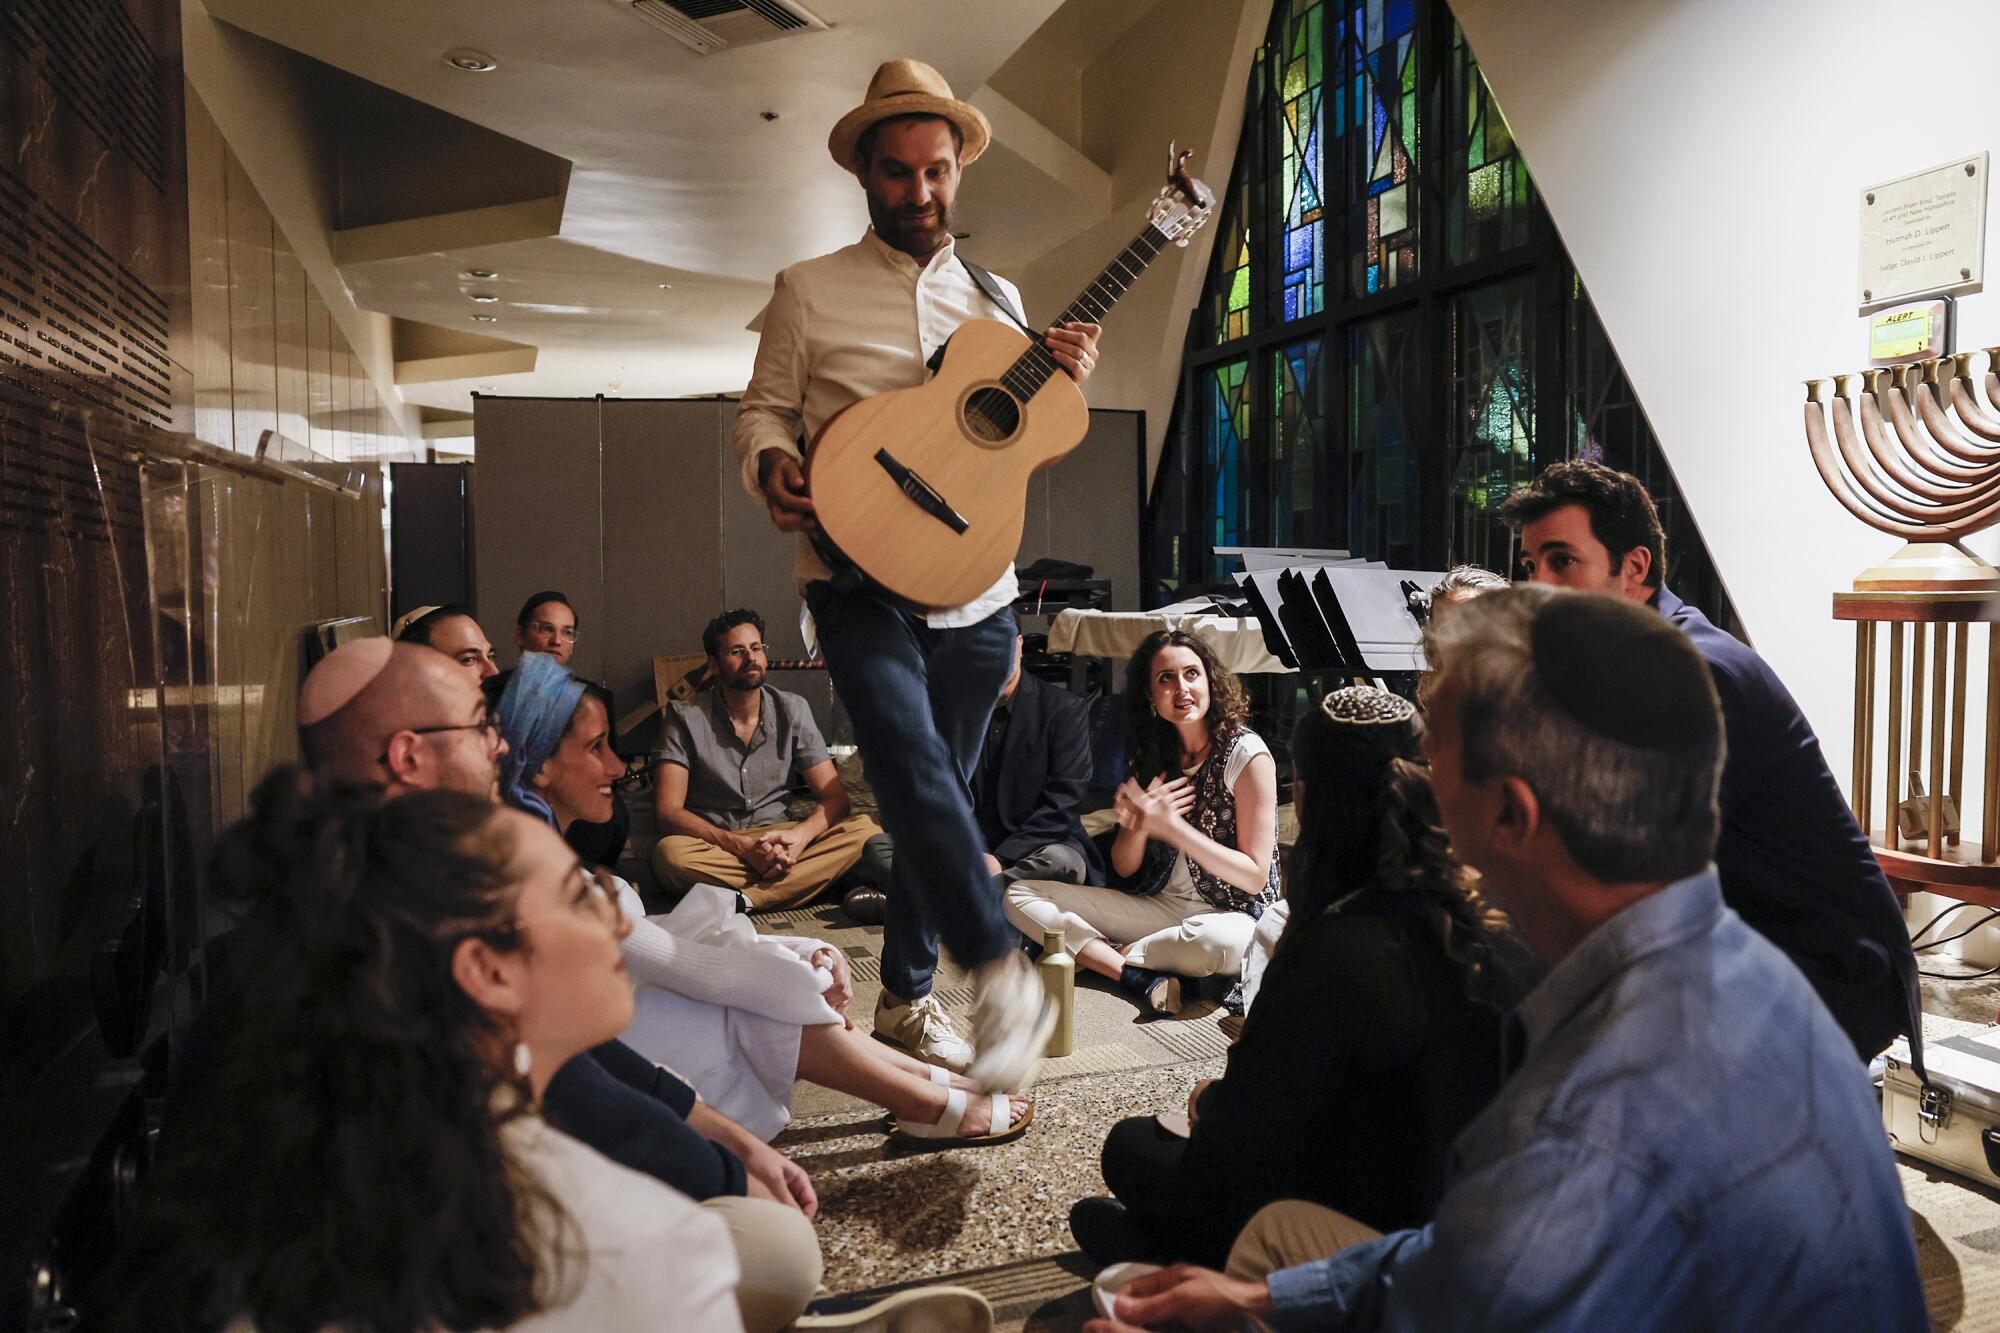 A man standing and holding a guitar, surrounded by several people seated on the floor.